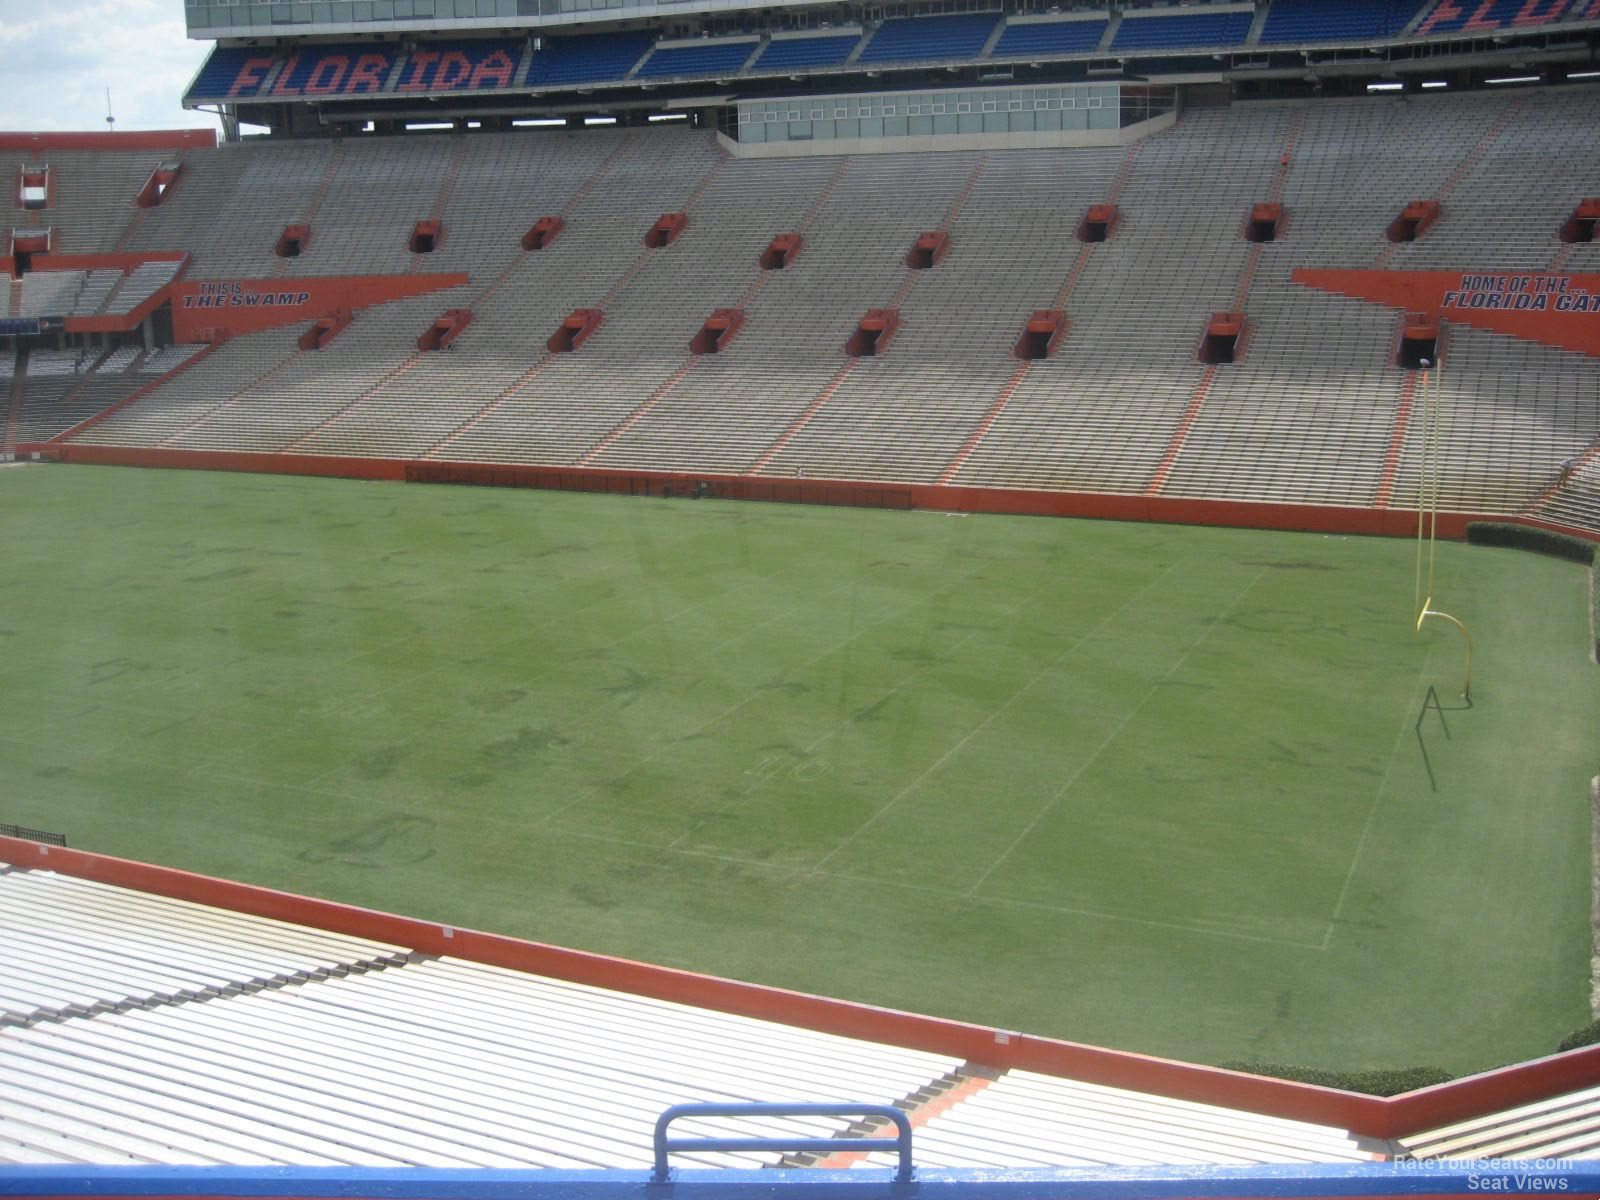 section 27, row 58 seat view  - ben hill griffin stadium